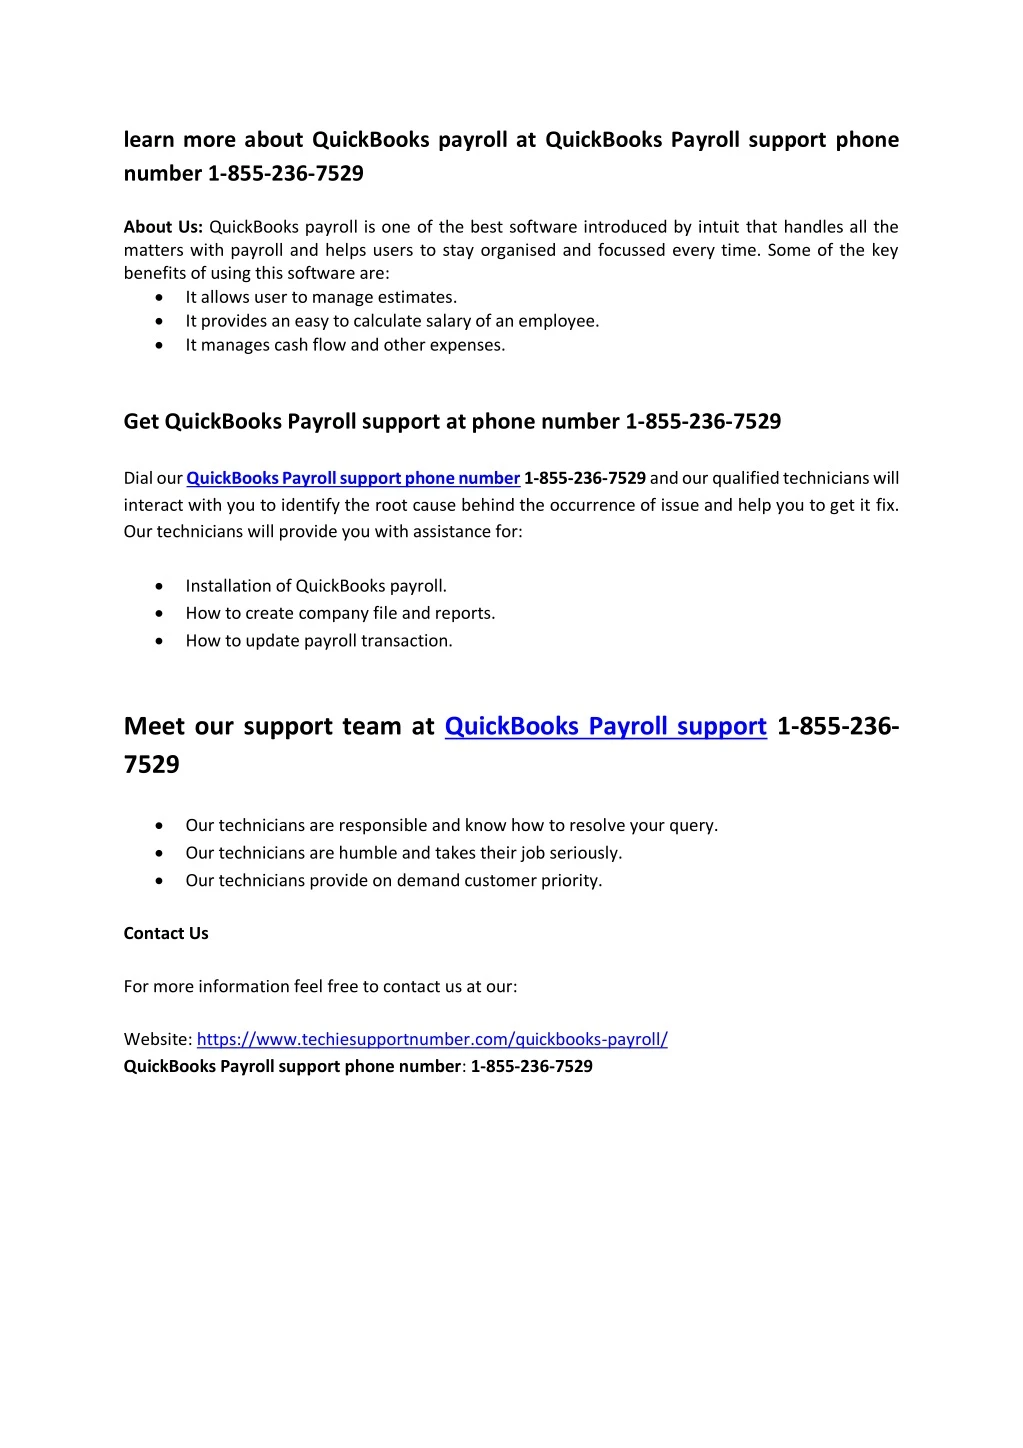 learn more about quickbooks payroll at quickbooks